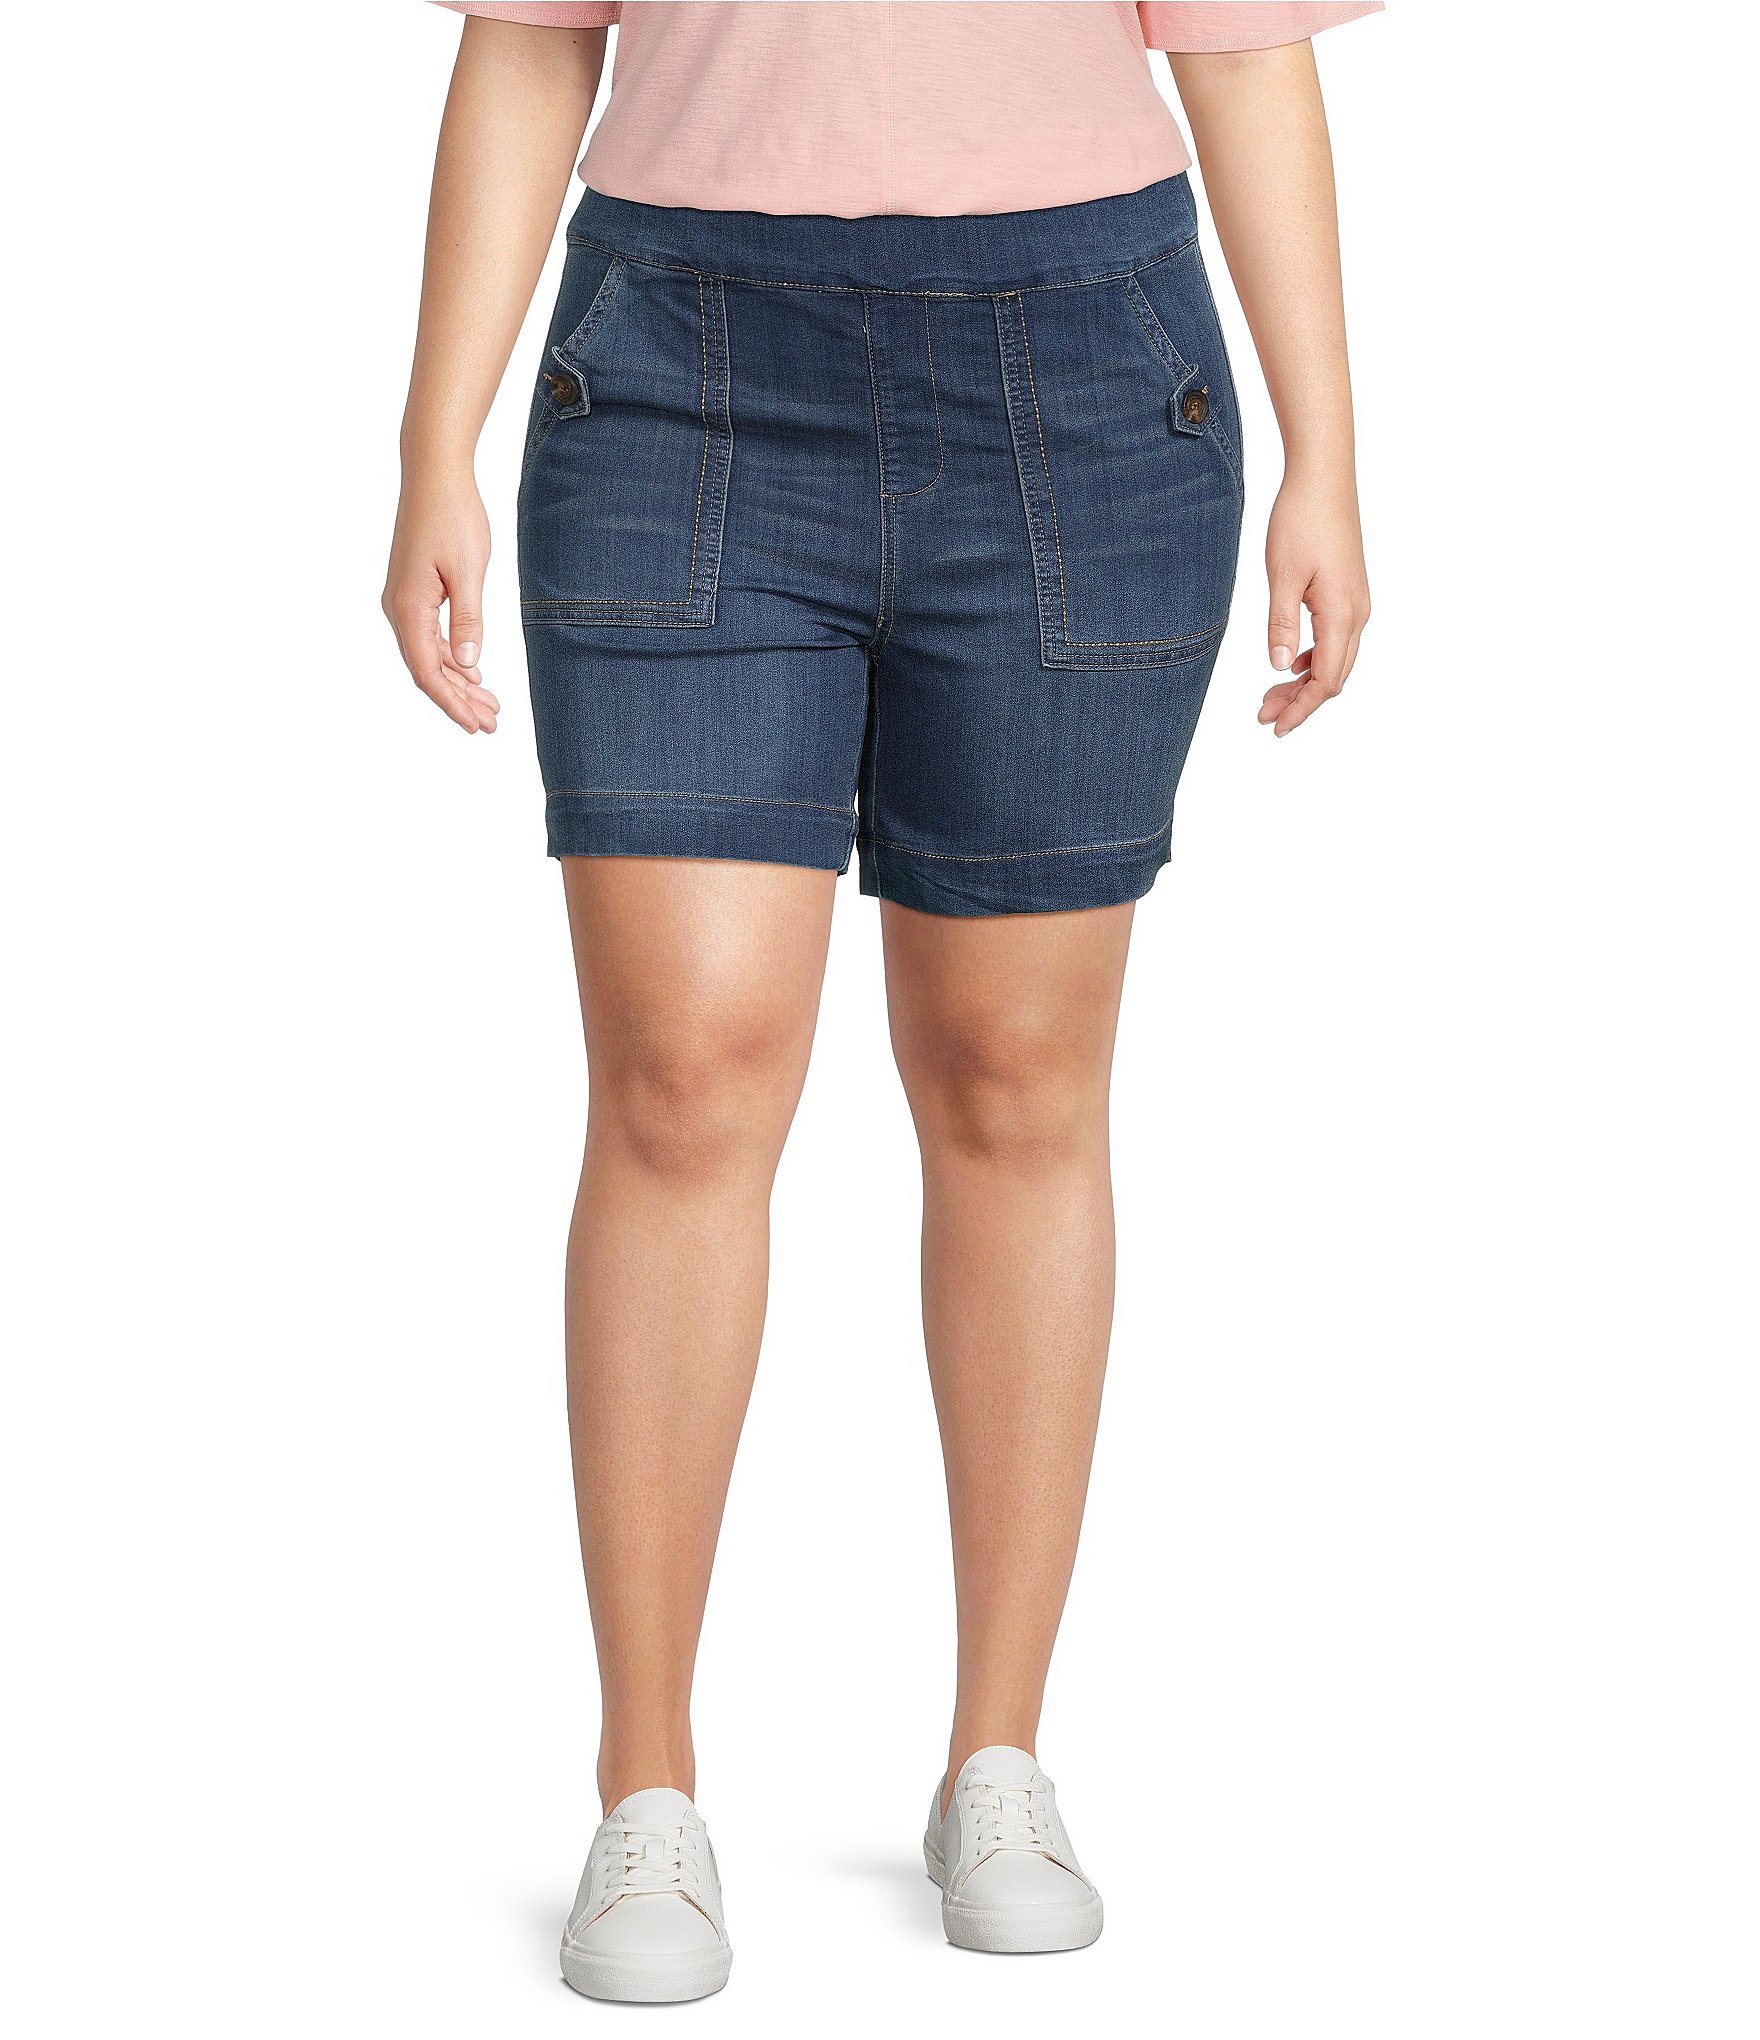 Westbound Plus Size Mid Rise 3 Button Pocket Pull-On Shorts | Dillard's